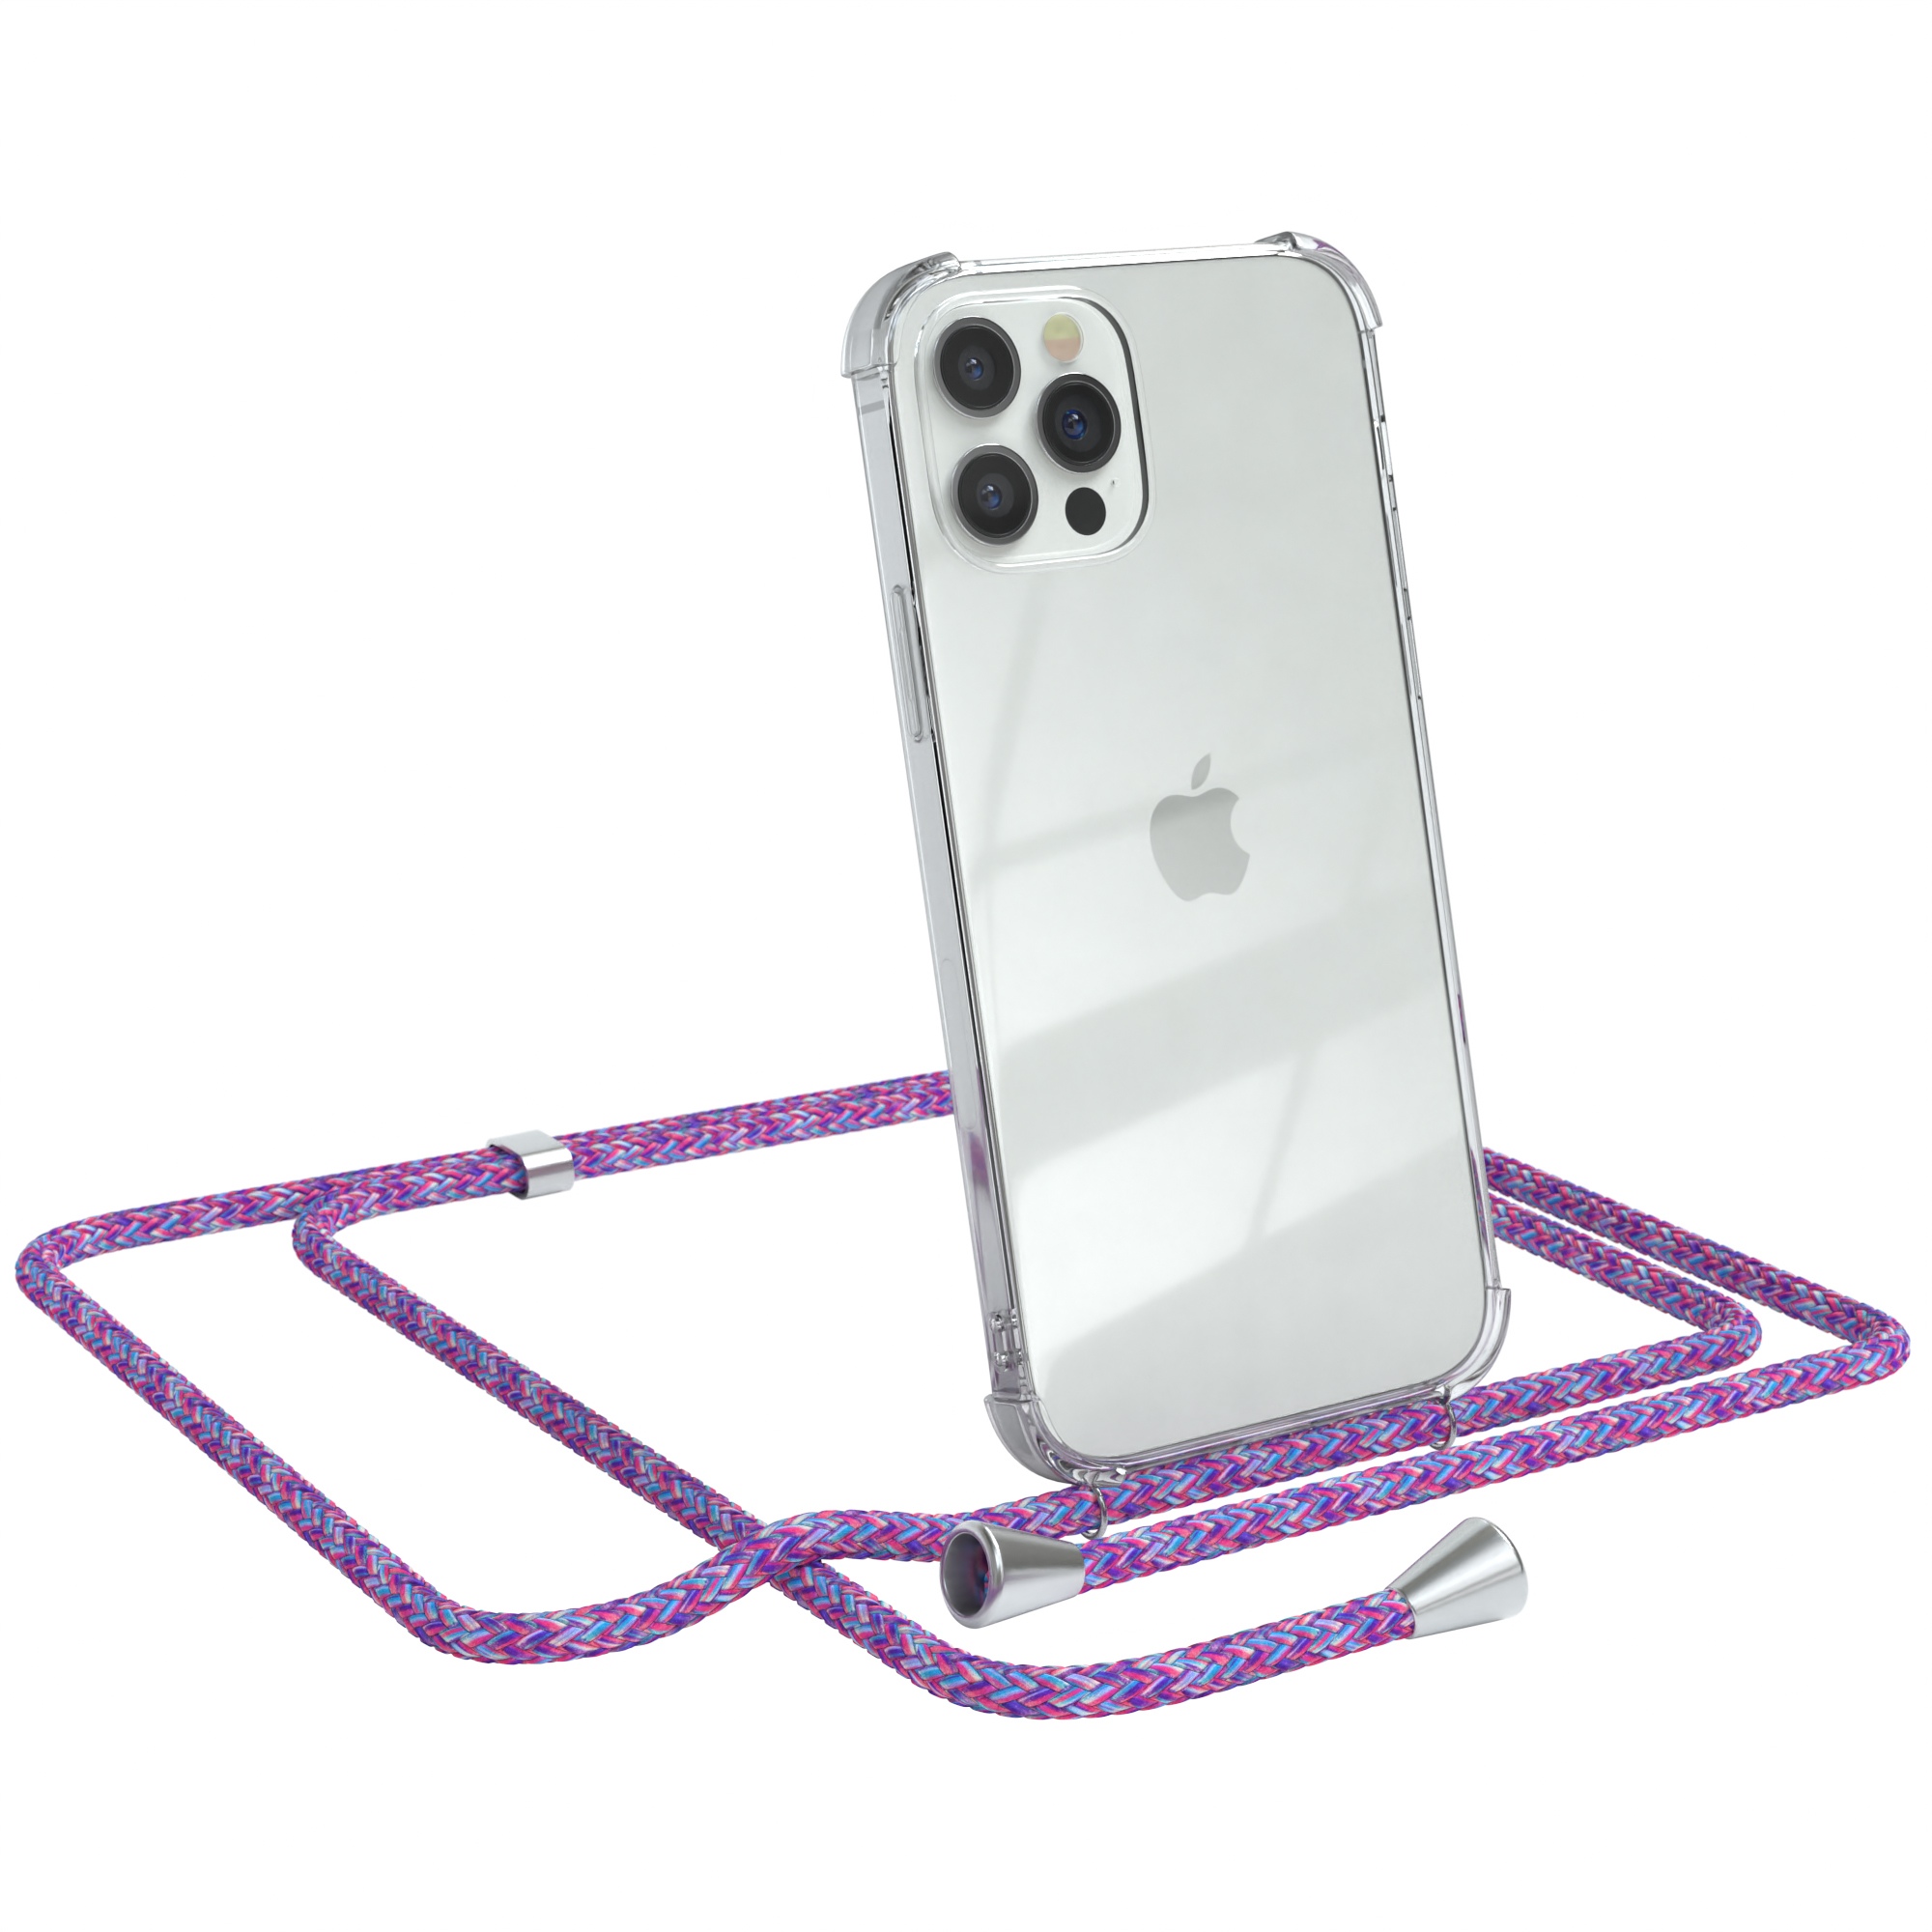 Clear Umhängeband, Clips Pro, / EAZY / 12 Umhängetasche, Silber Cover Lila 12 iPhone Apple, CASE mit